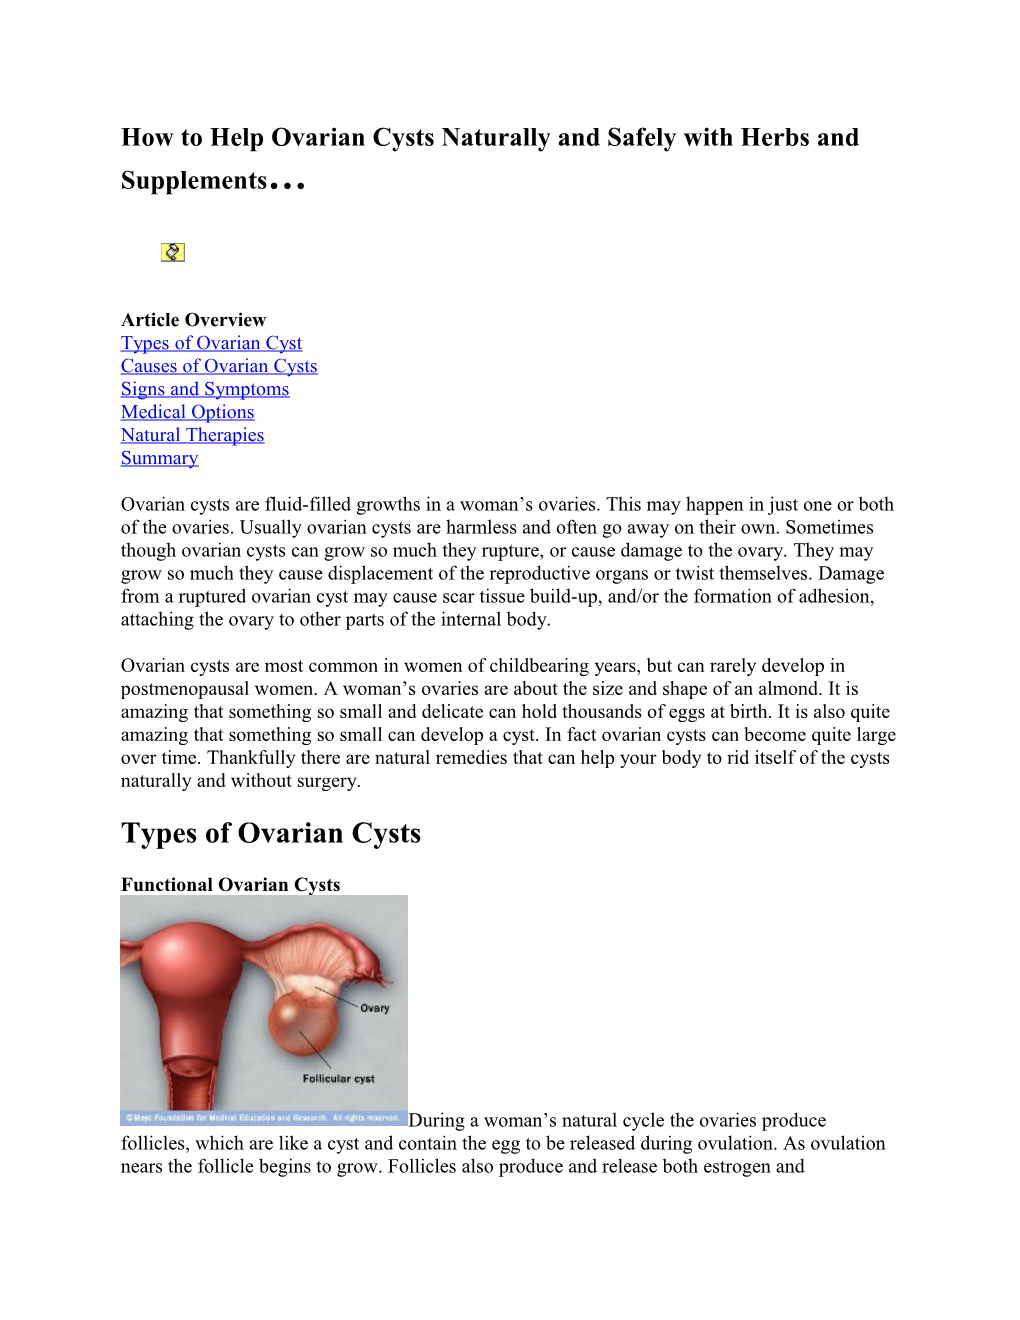 How to Help Ovarian Cysts Naturally and Safely with Herbs and Supplements